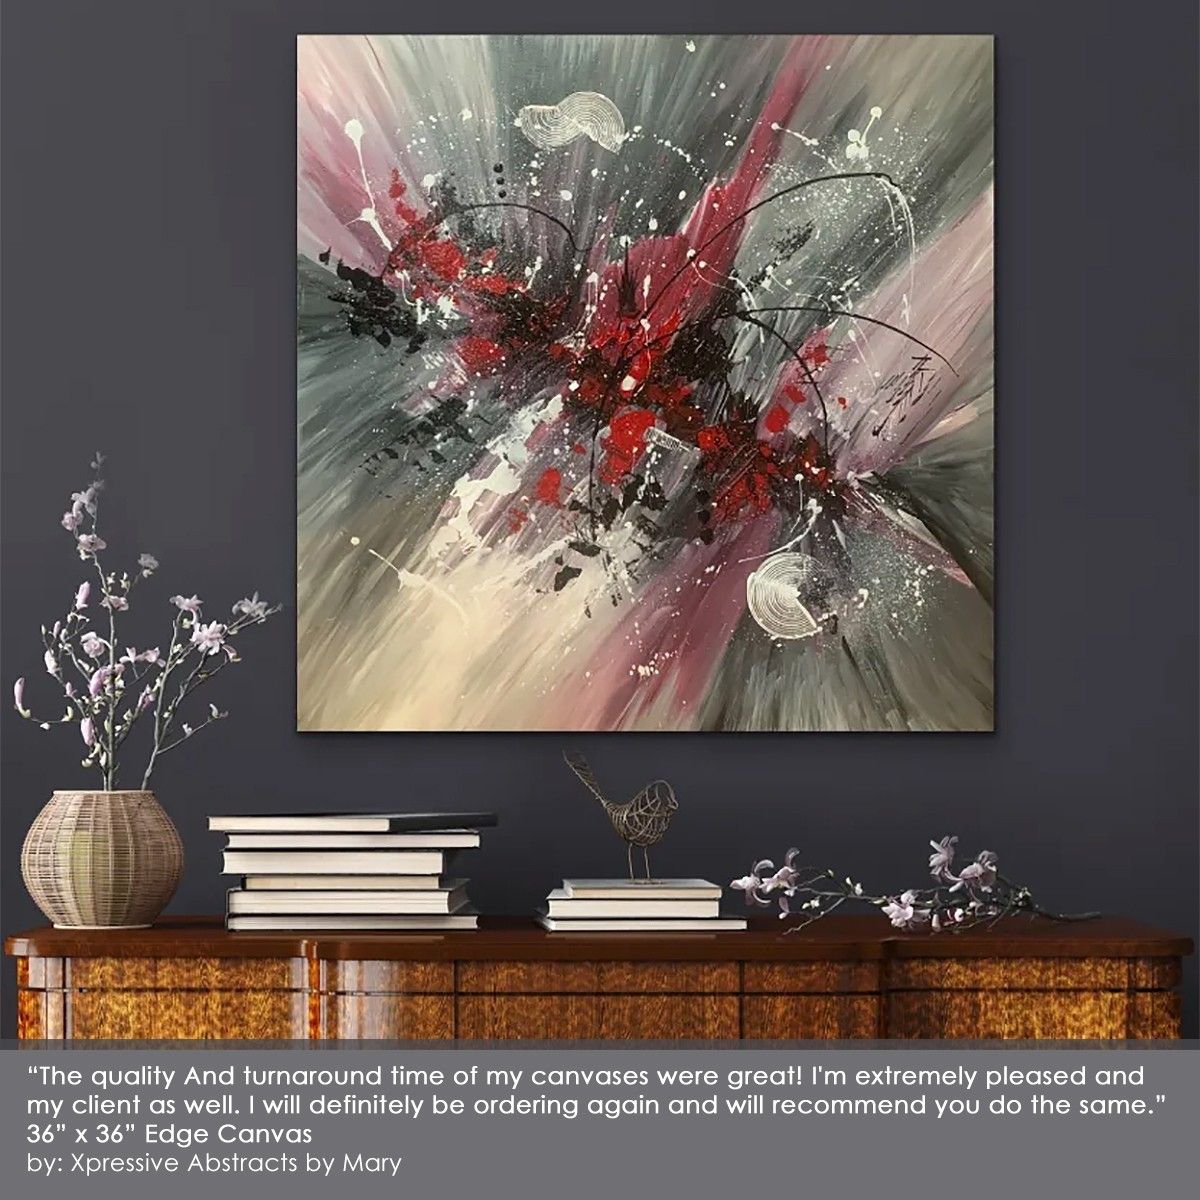 "I'm extremely pleased, my client as well!" Xpressive Abstracts By Mary